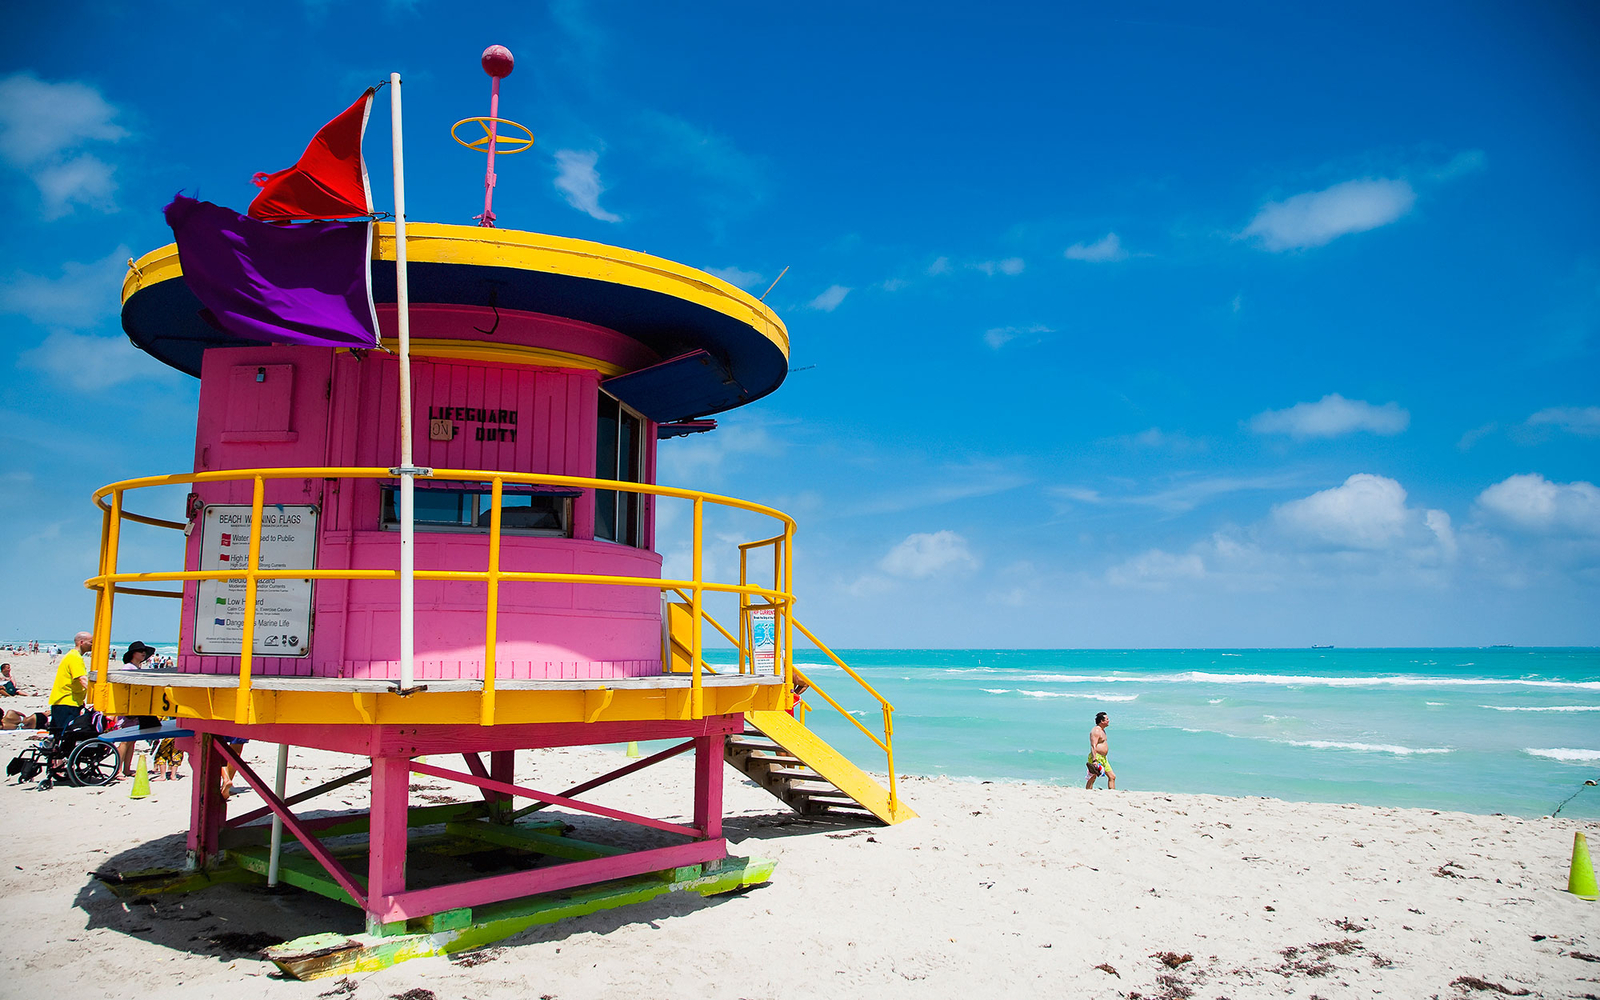 lifeguard tower on the beach in Miami, FL